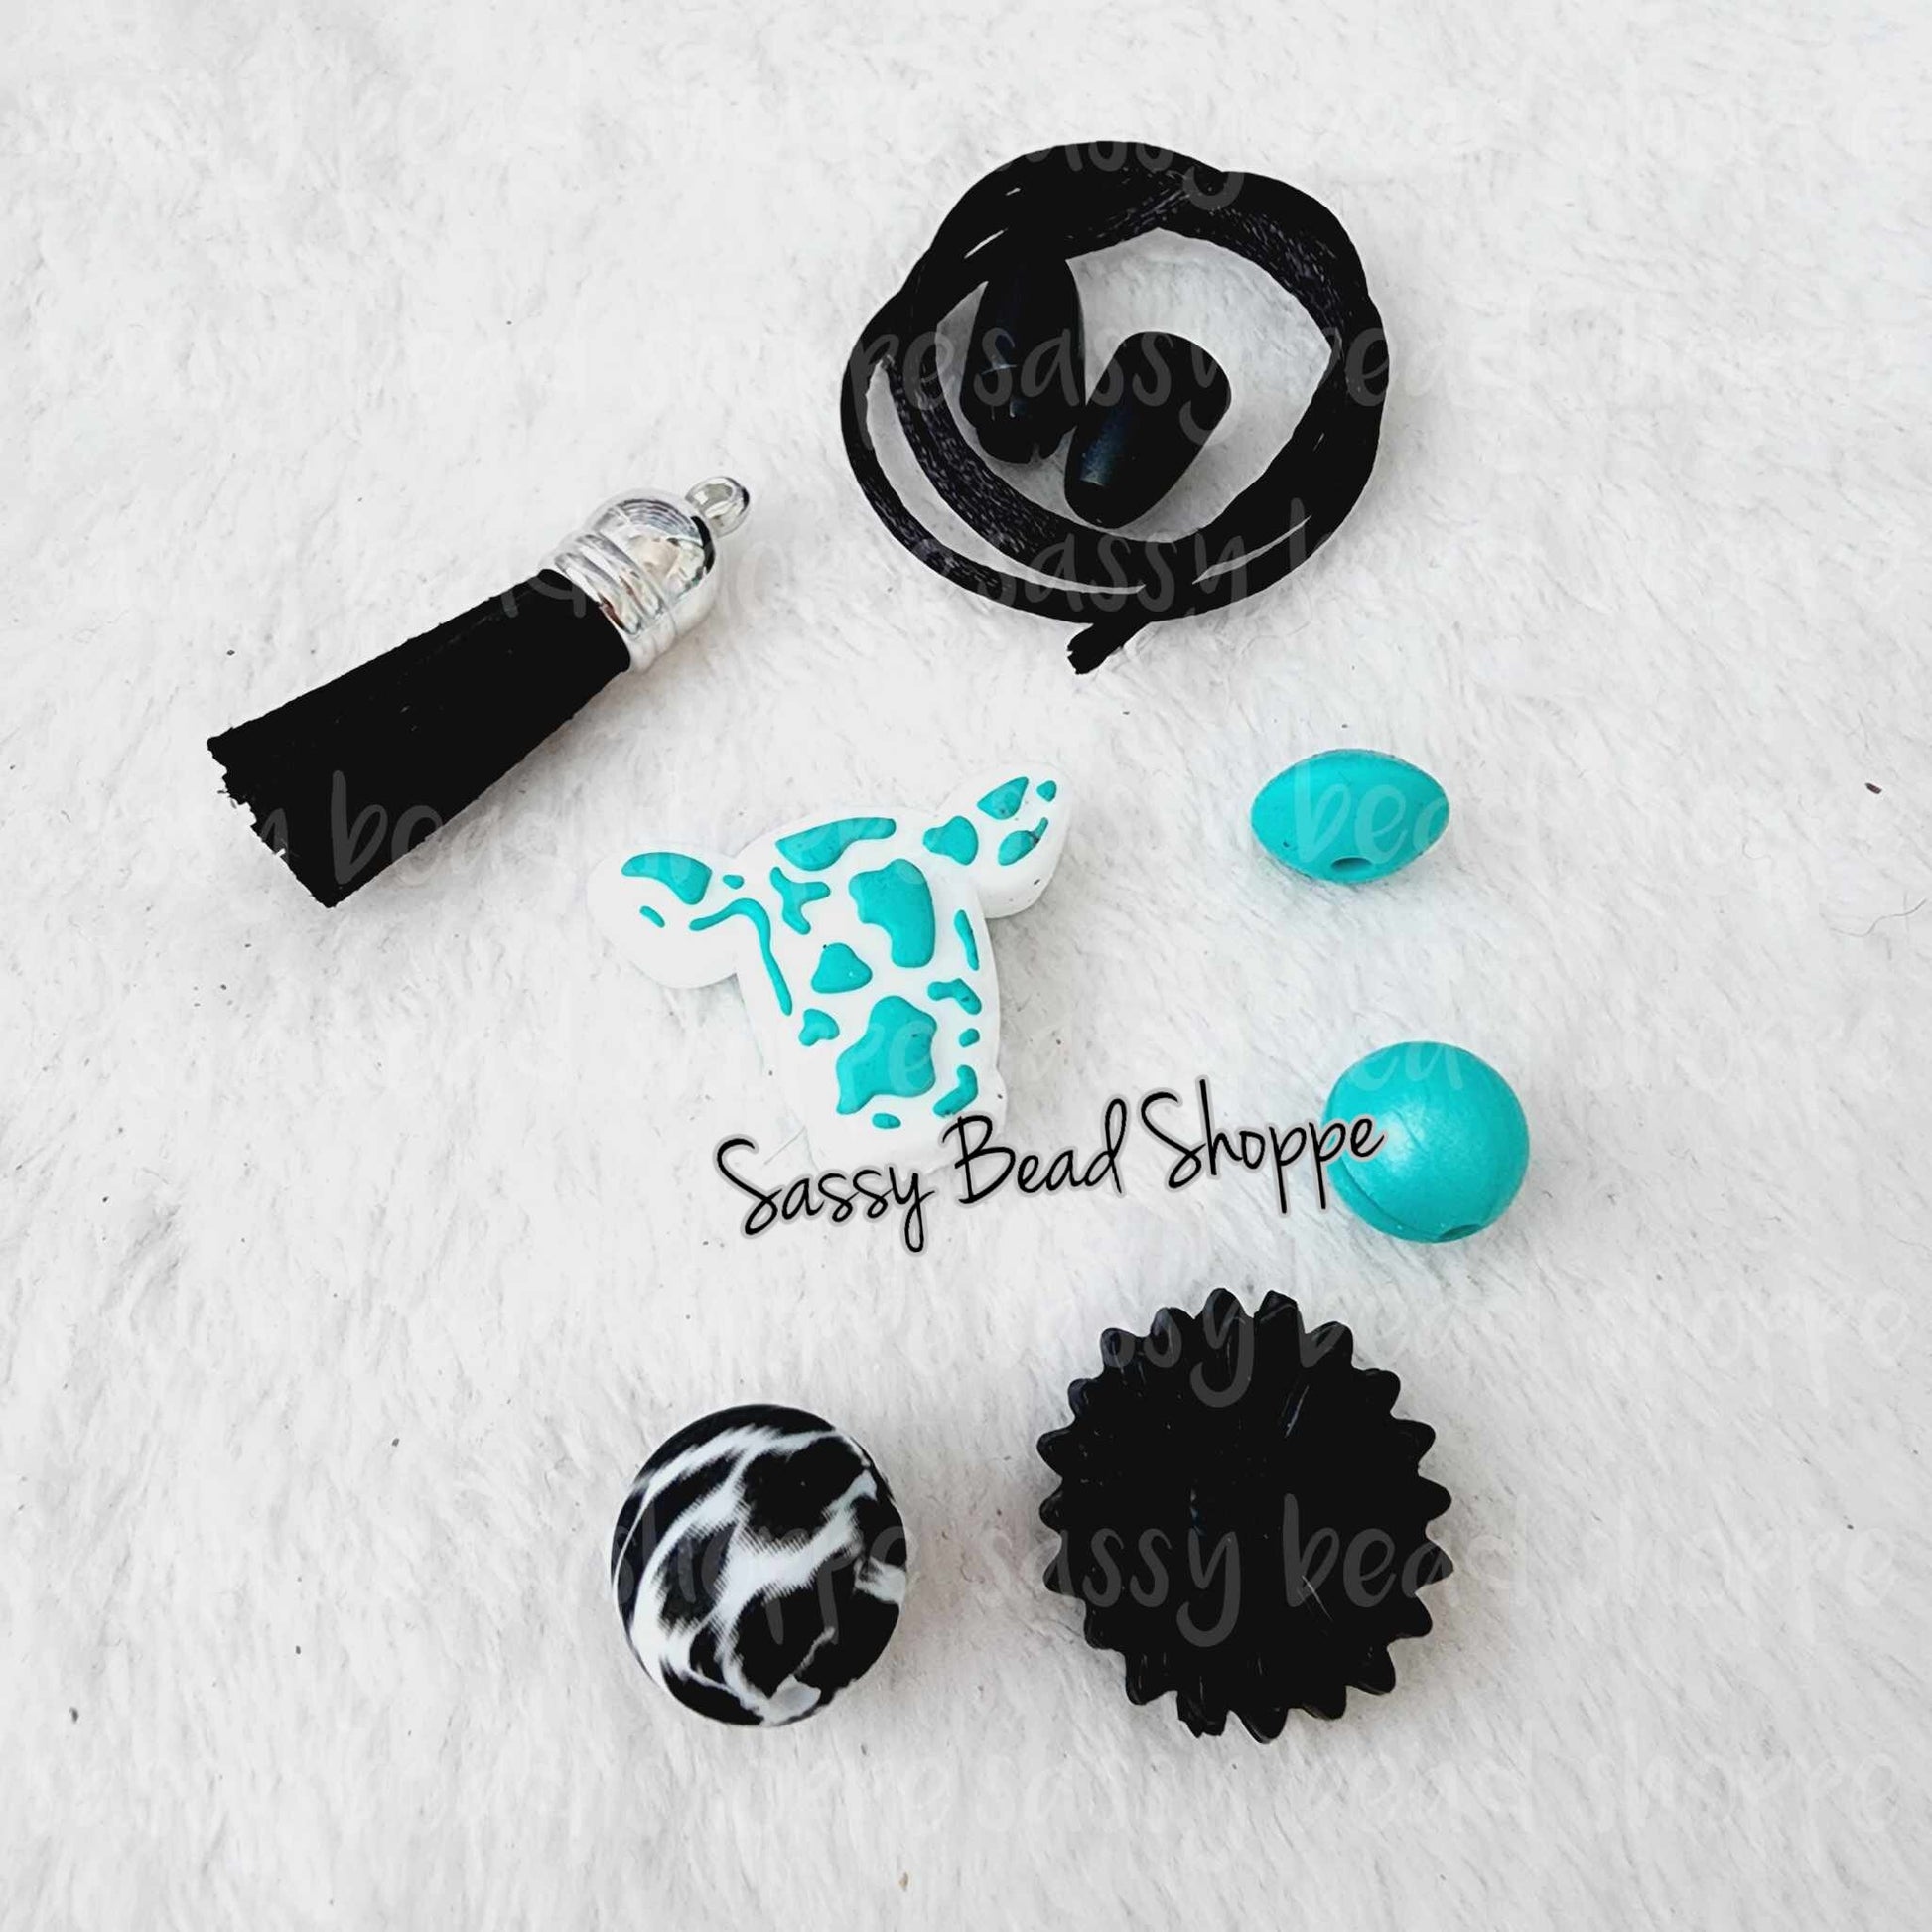 Sassy Bead Shoppe Western Cow Turquoise Car Charm What you will receive in your kit